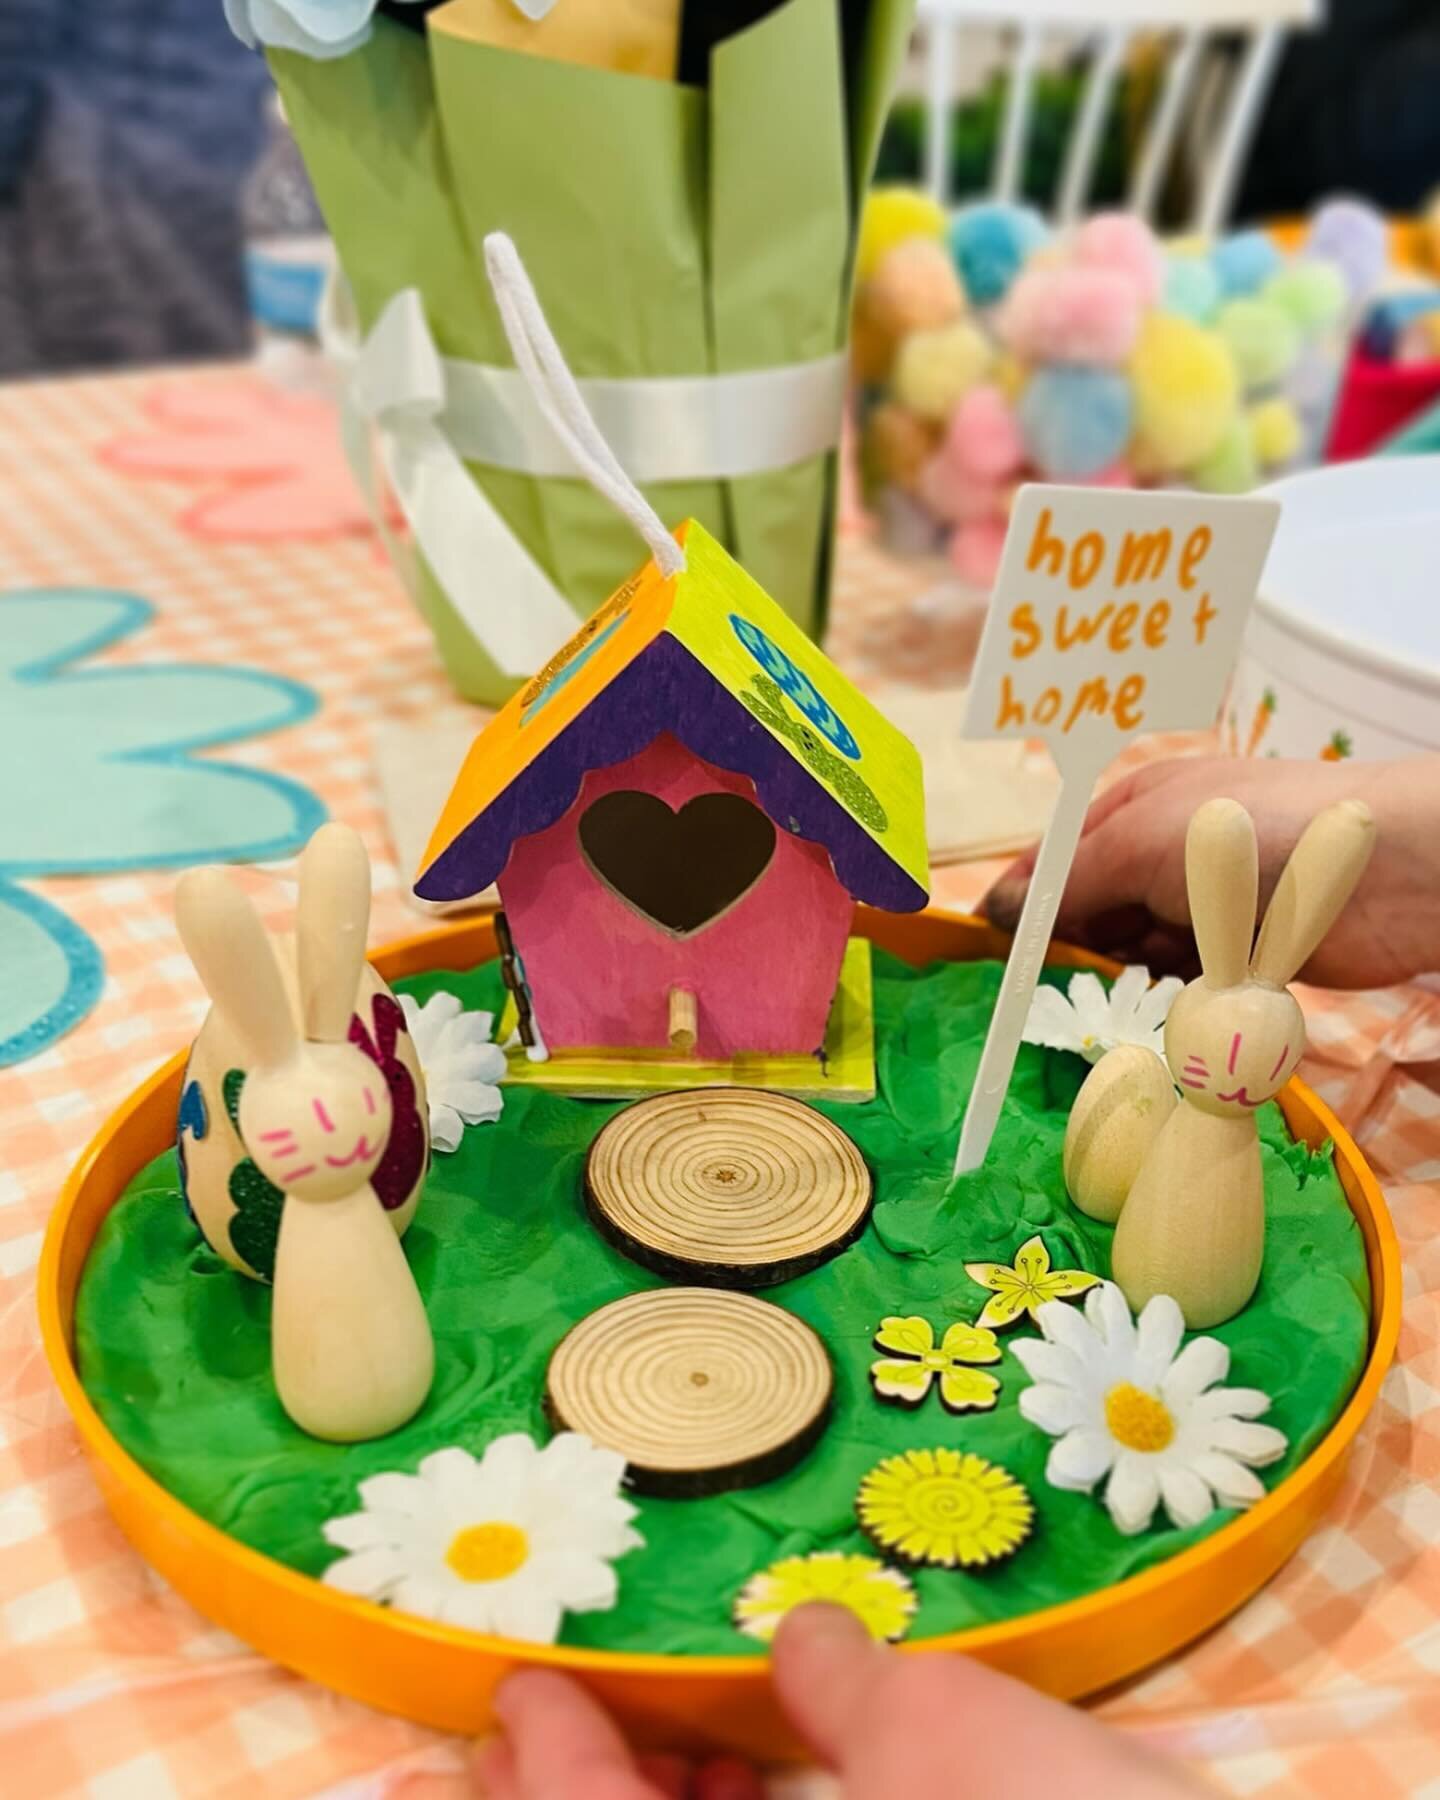 🐰🏠❤️ Giving these masterpieces the recognition they deserve! 

#craftyevents #kidscrafts #eastercraftsforkids #riversideil #lagrangeil #ohyayitsyourday #justaddwaterlemon